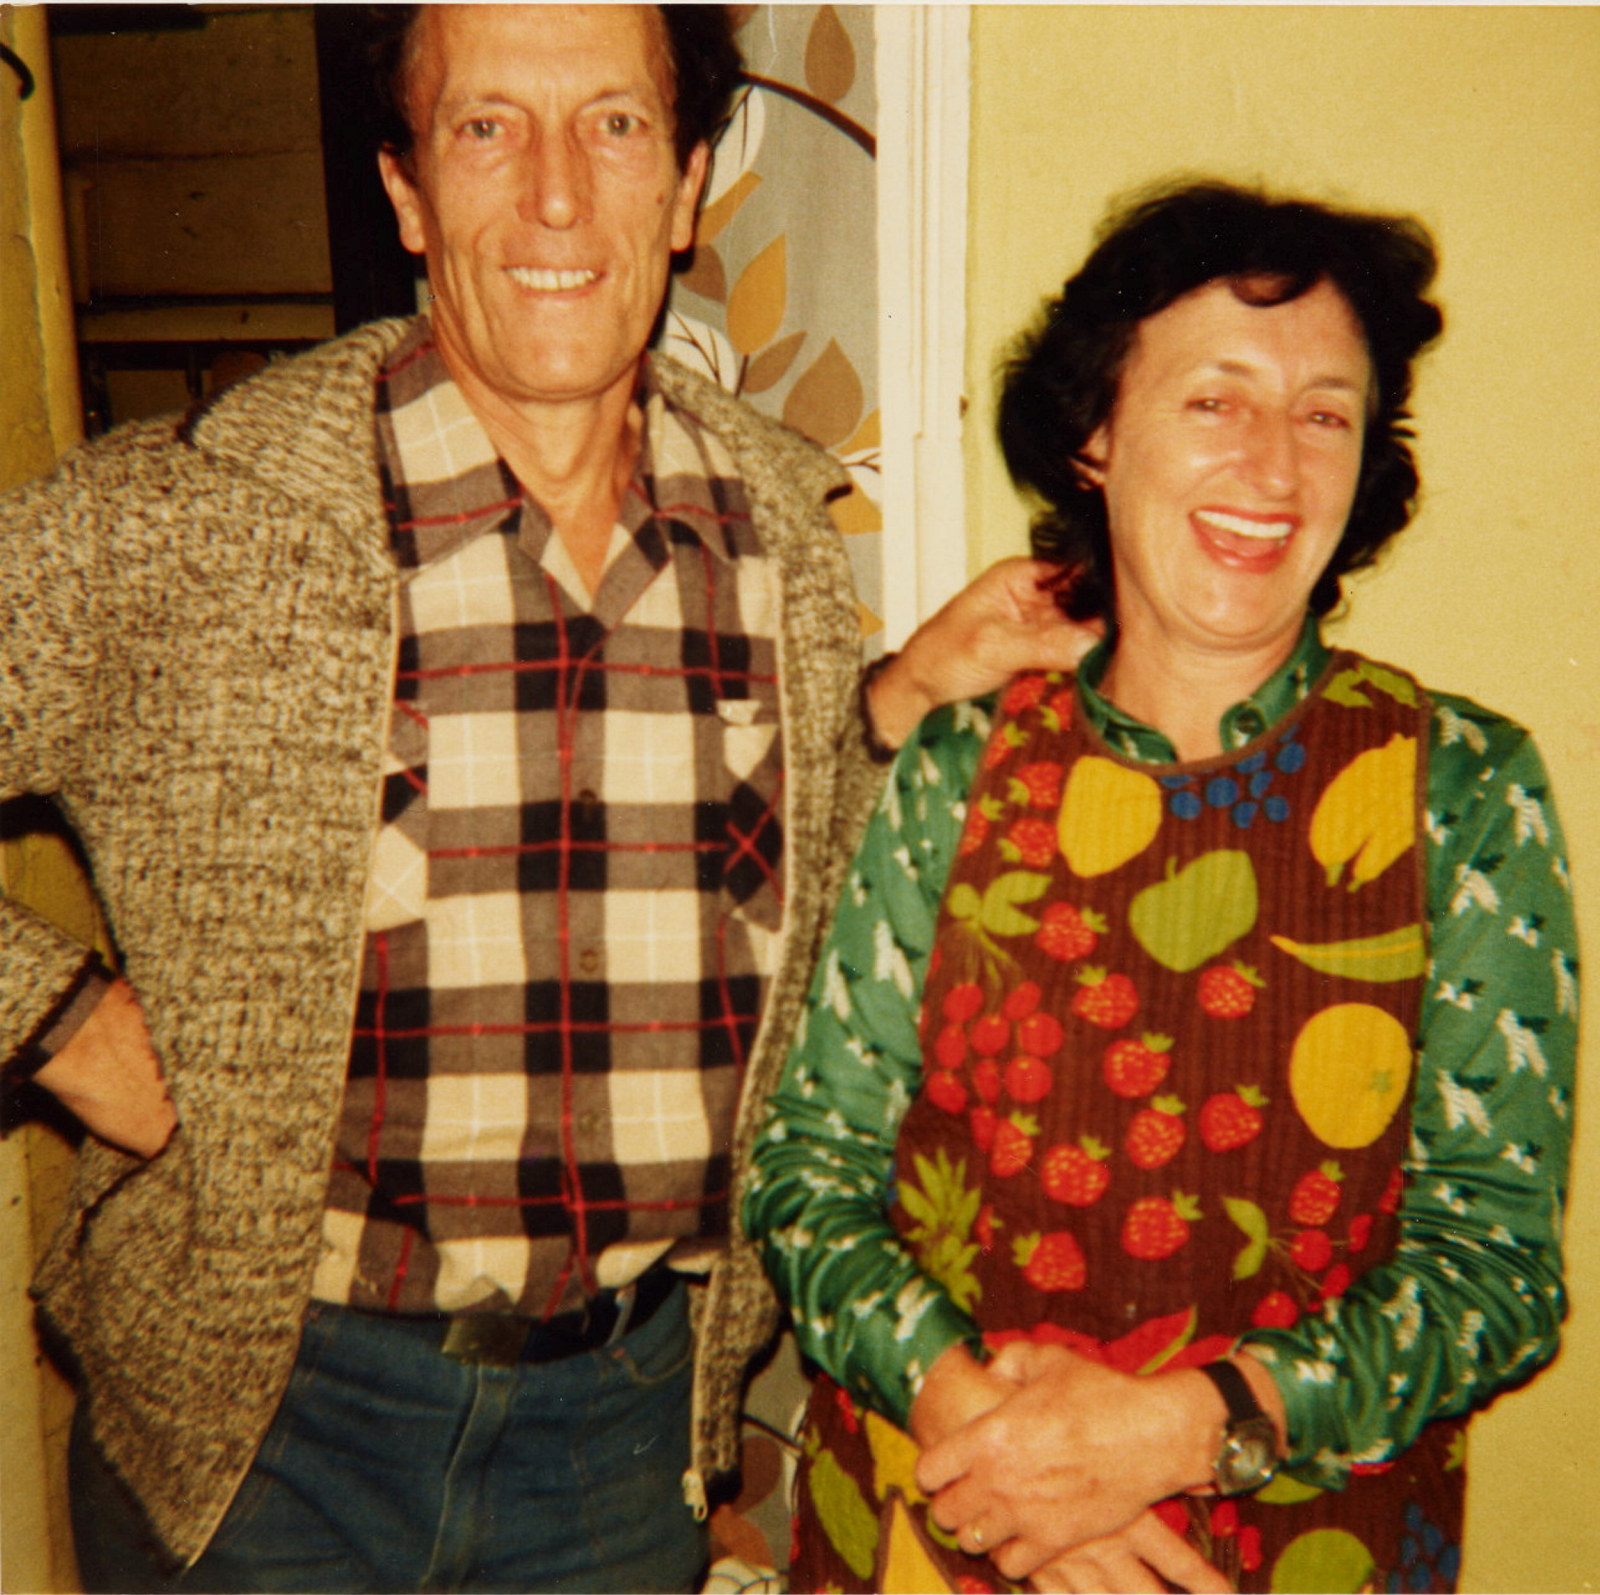 Man wearing cardigan and checked shirt (left) with woman wearing colourful top (right).